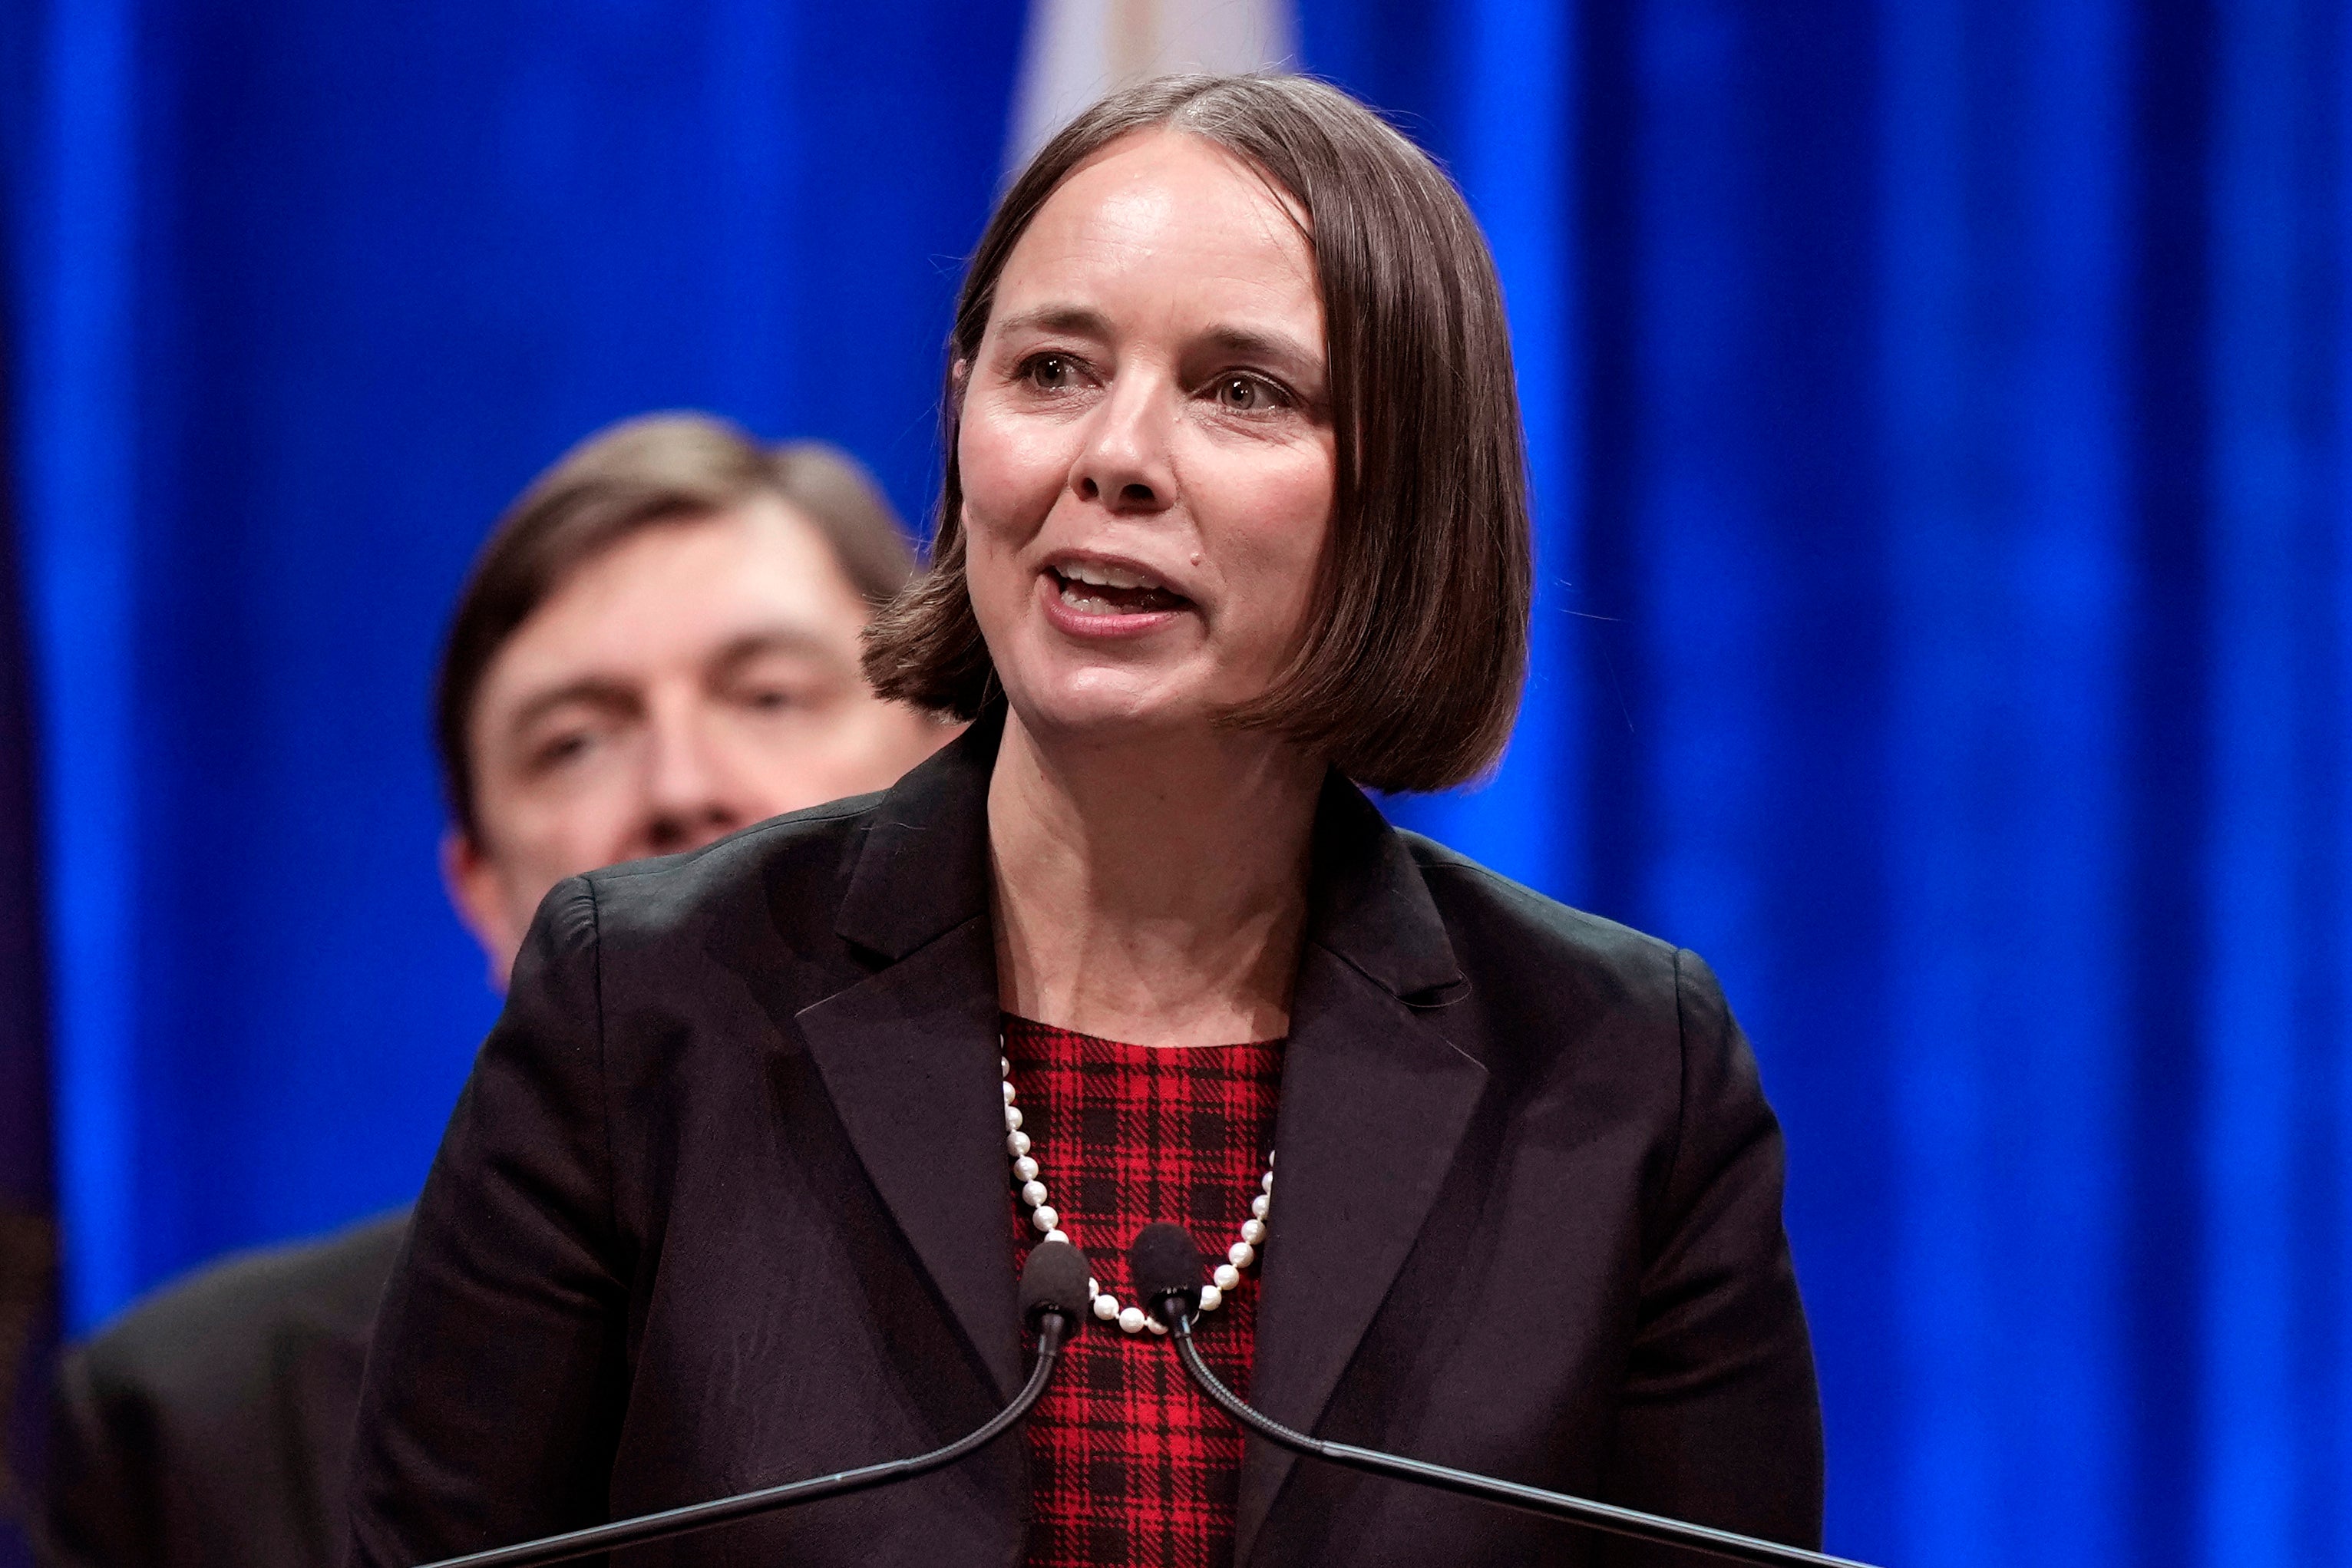 Secretary of State Shenna Bellows speaks at an event, Jan. 4, 2023, in Augusta, Maine.